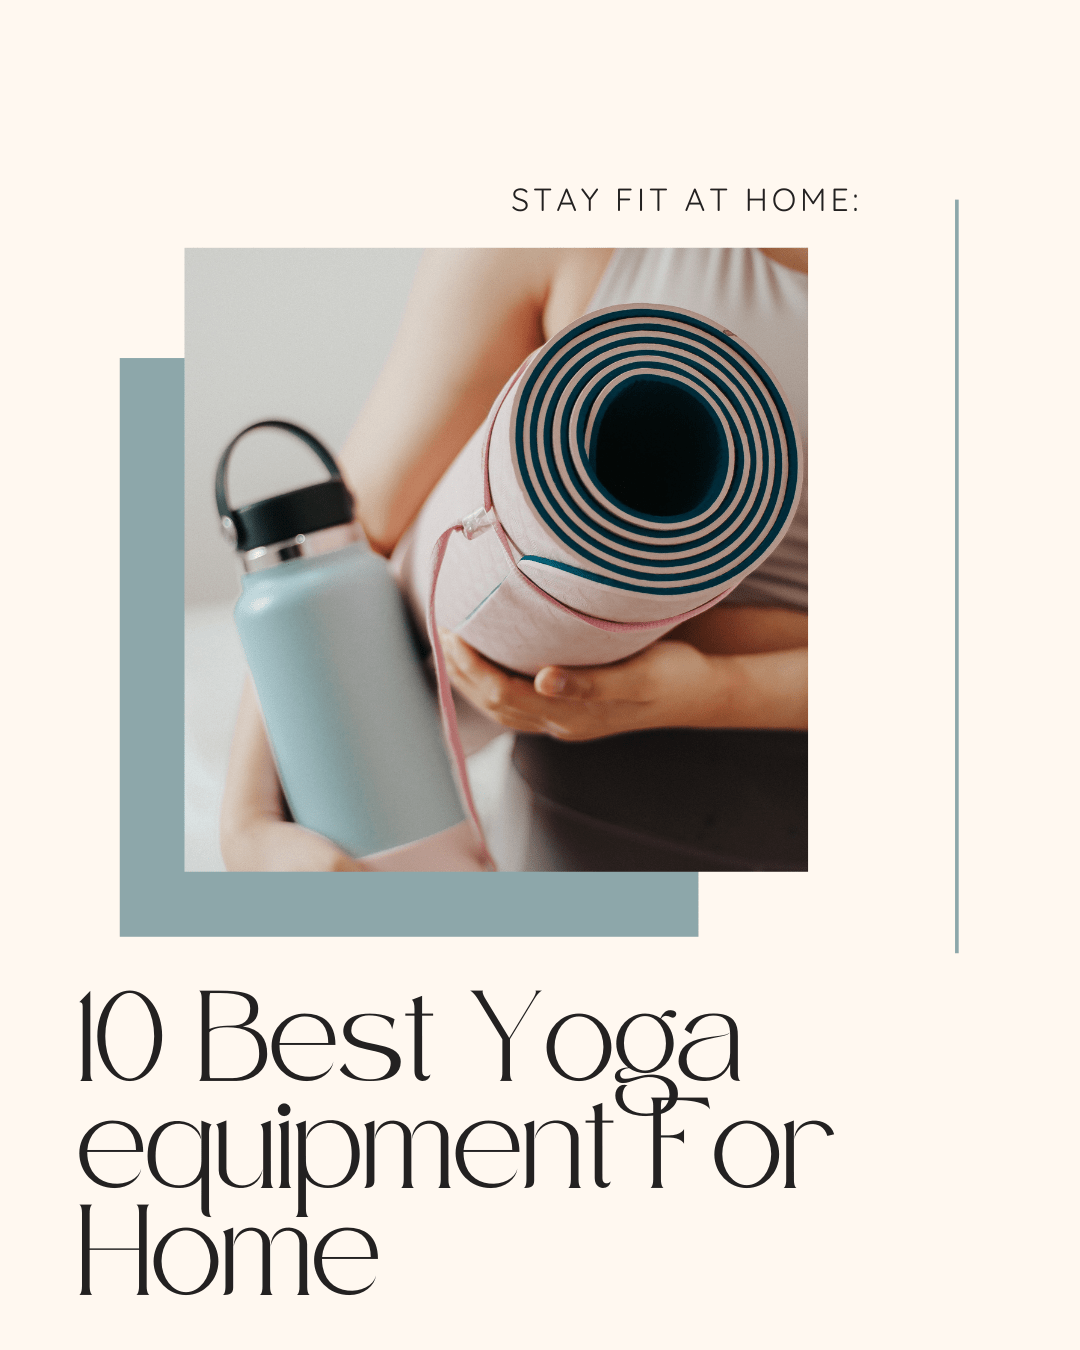 10 Best yoga equipment for home use